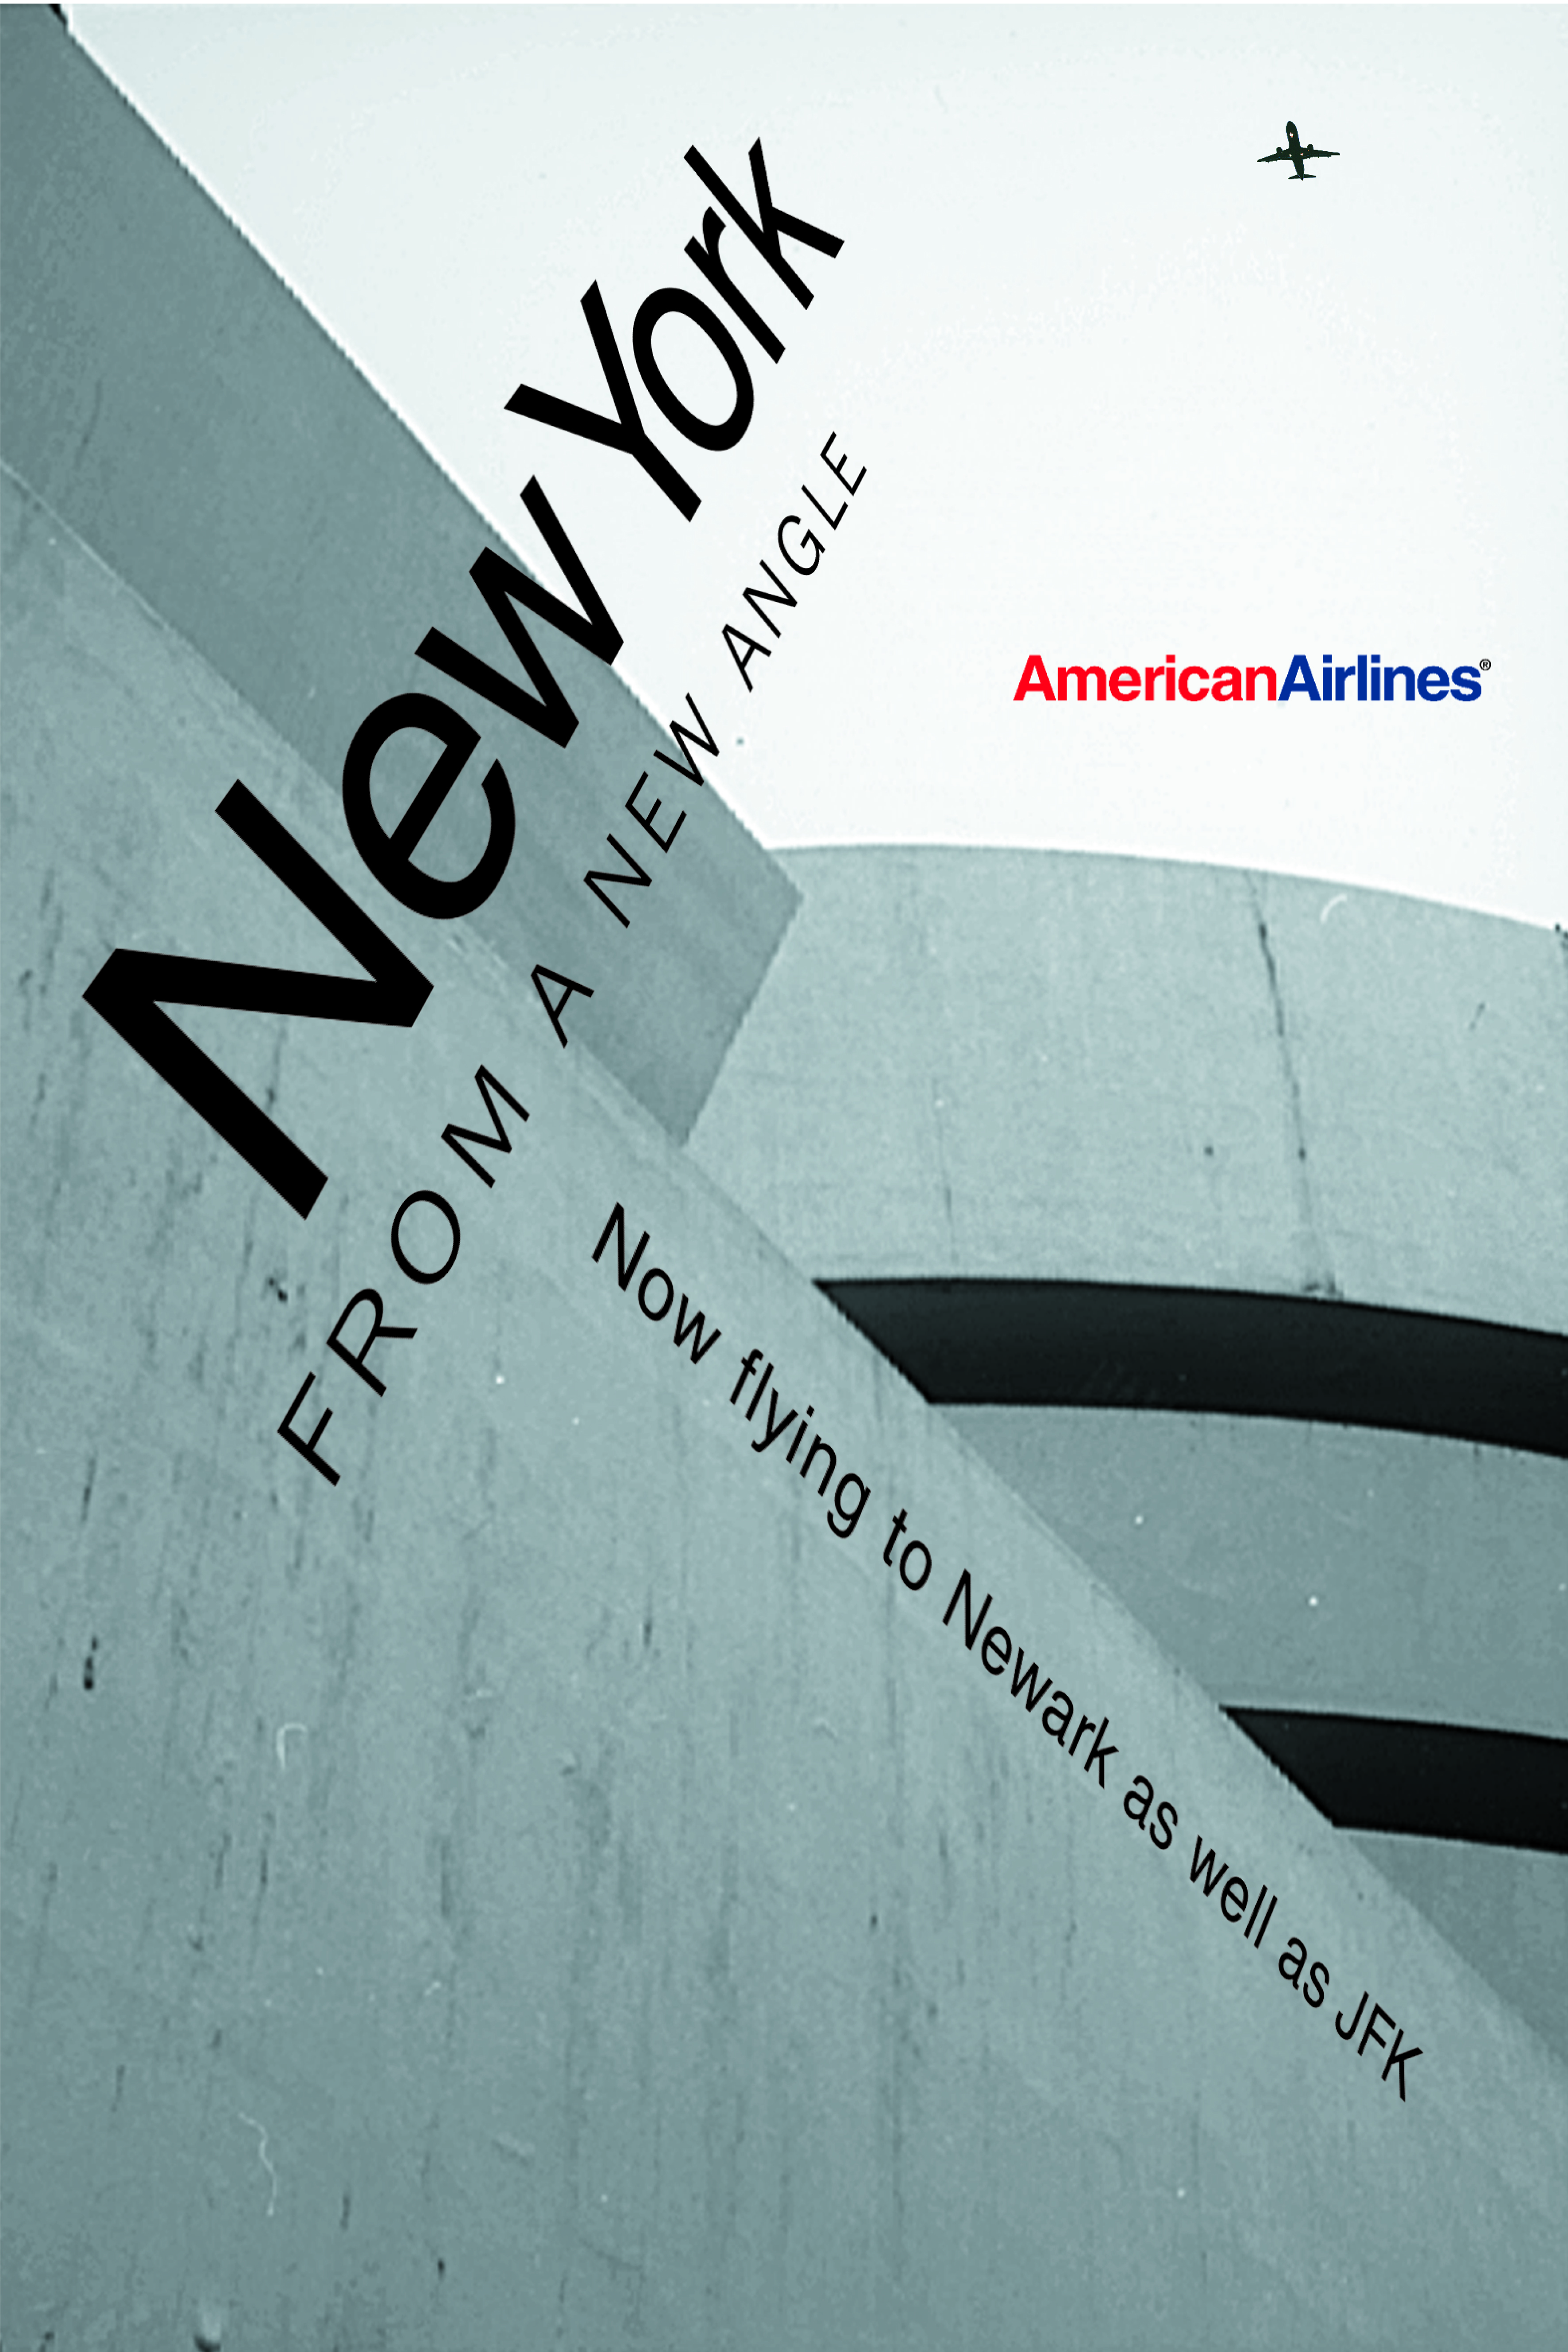 American Airlines, Angles, 'Guggenheim', BMP:DDB